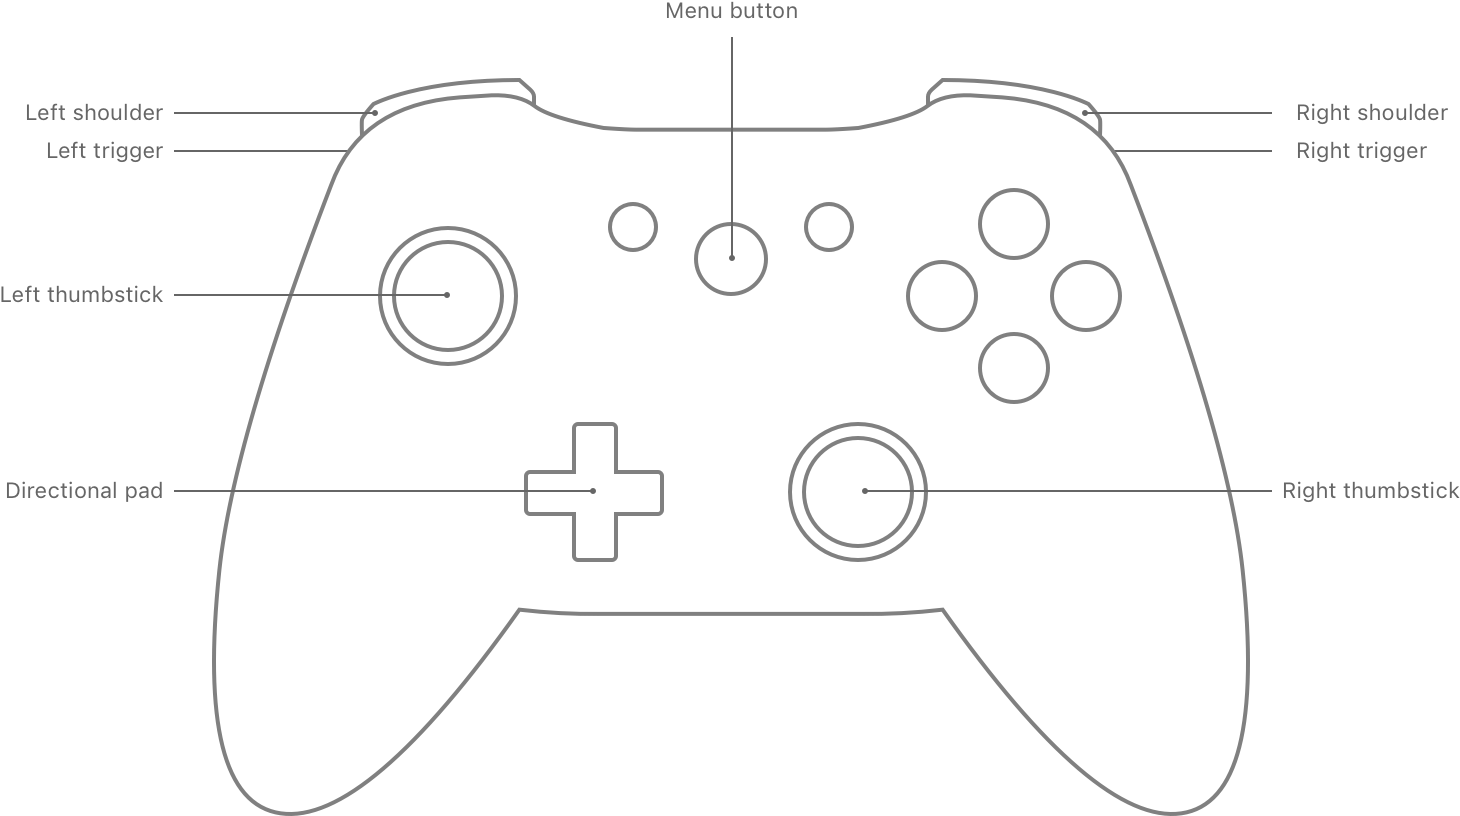 A diagram of a game controller with callouts that indicate the locations of the controller’s triggers, shoulder buttons, directional pad, and thumbsticks.